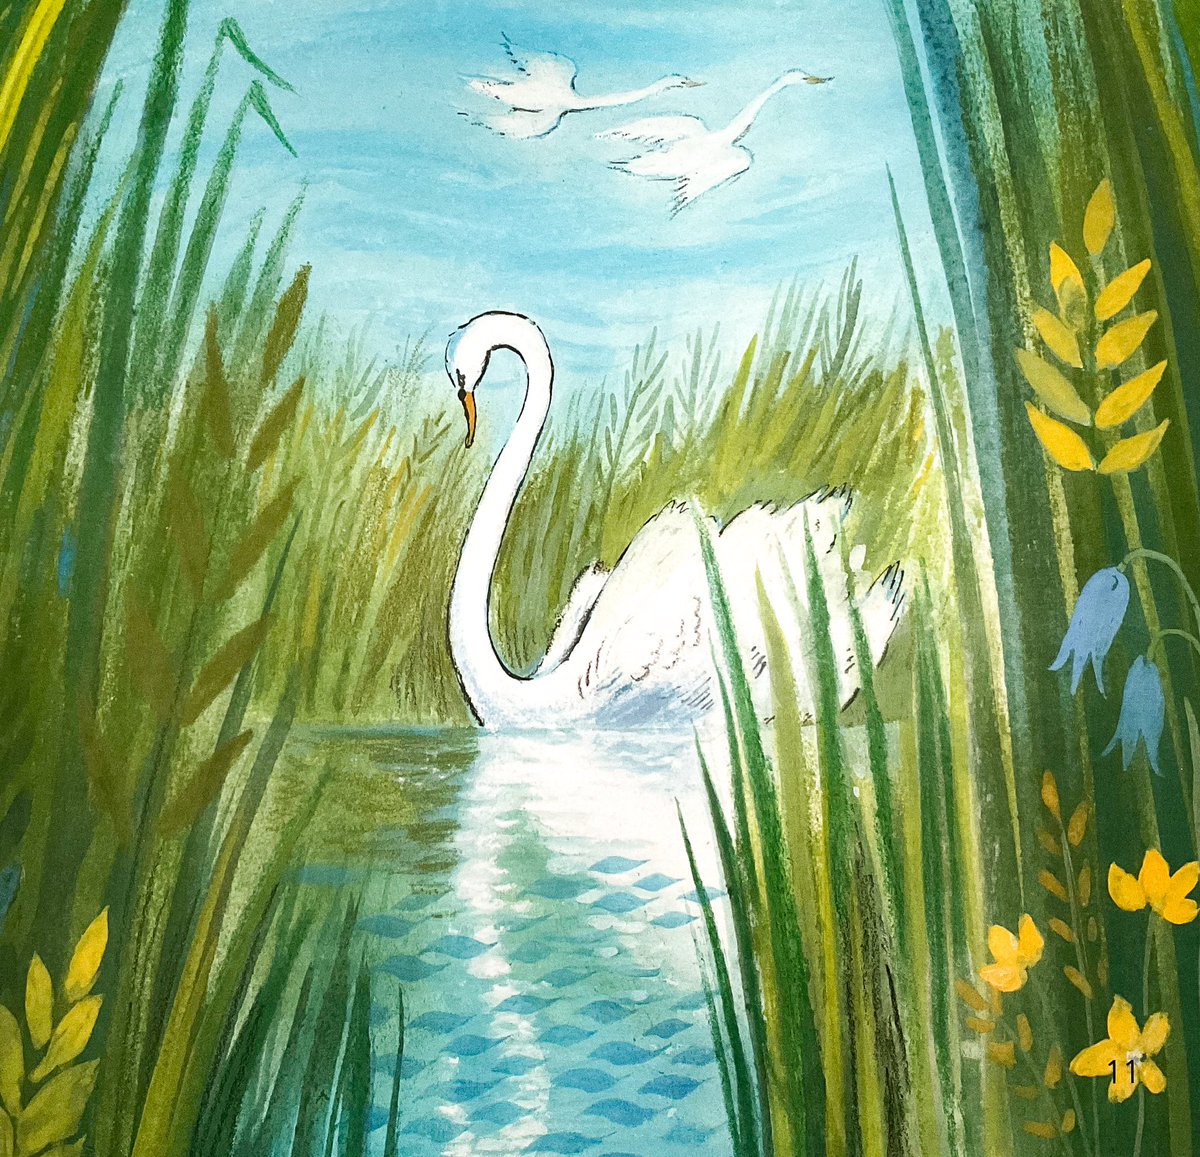 #BookIllustrationOfTheDay is from “The Ugly Duckling” (2013). A wordless retelling of Andersen’s tale, an “Early Reader” for schools. I loved the challenge of telling the story through pictures alone, & the fairly painterly approach. 

Here our duckling becomes a swan. #60for60